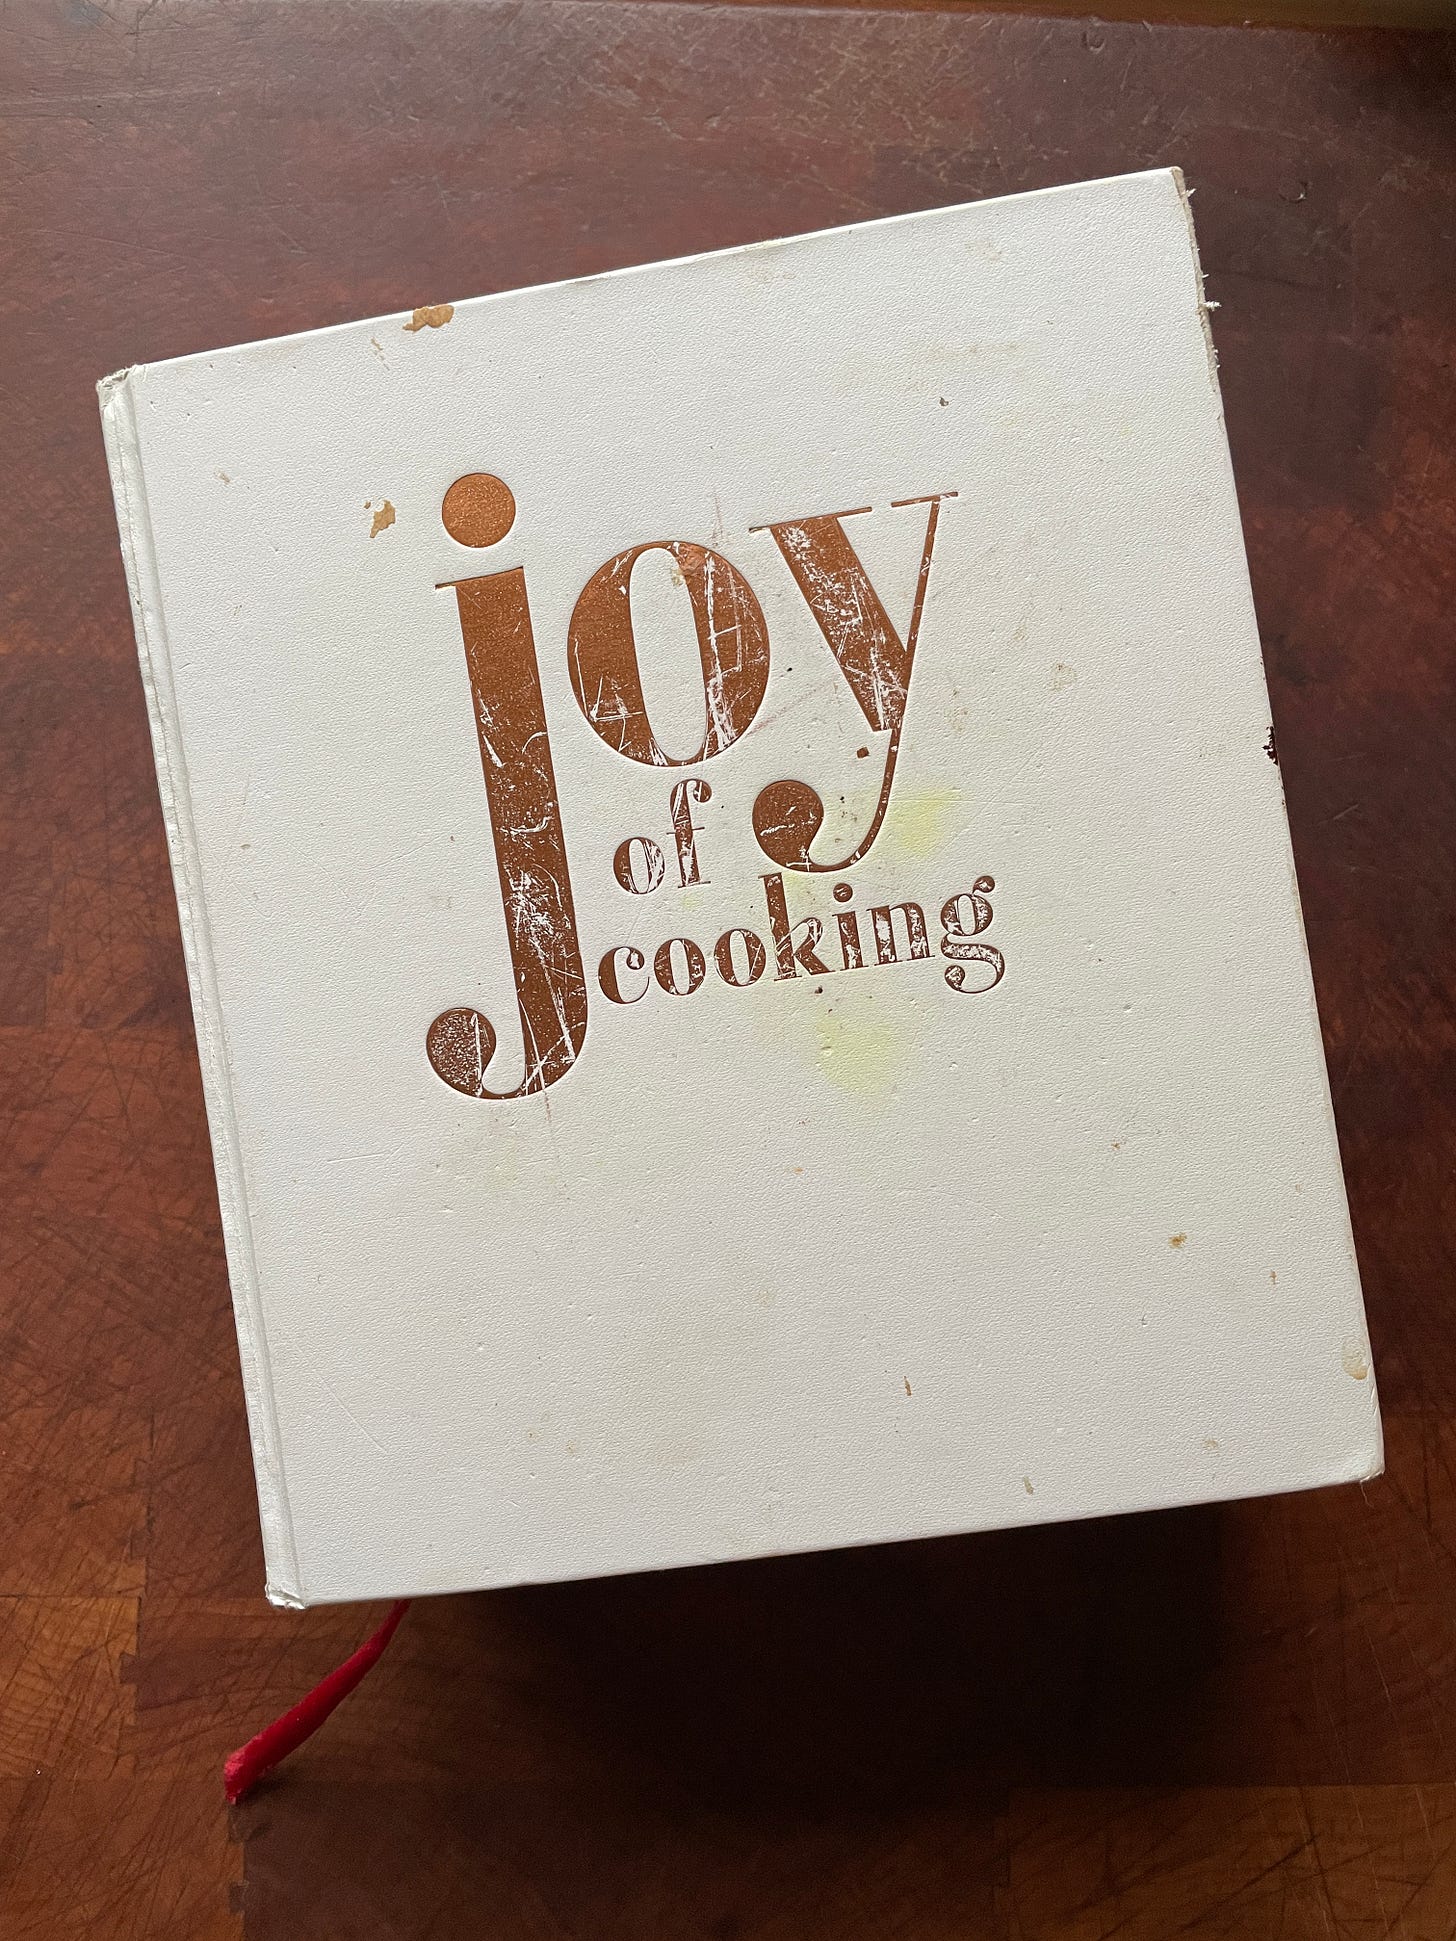 A copy of the Joy of Cooking cookbook with a stained and scratched cover